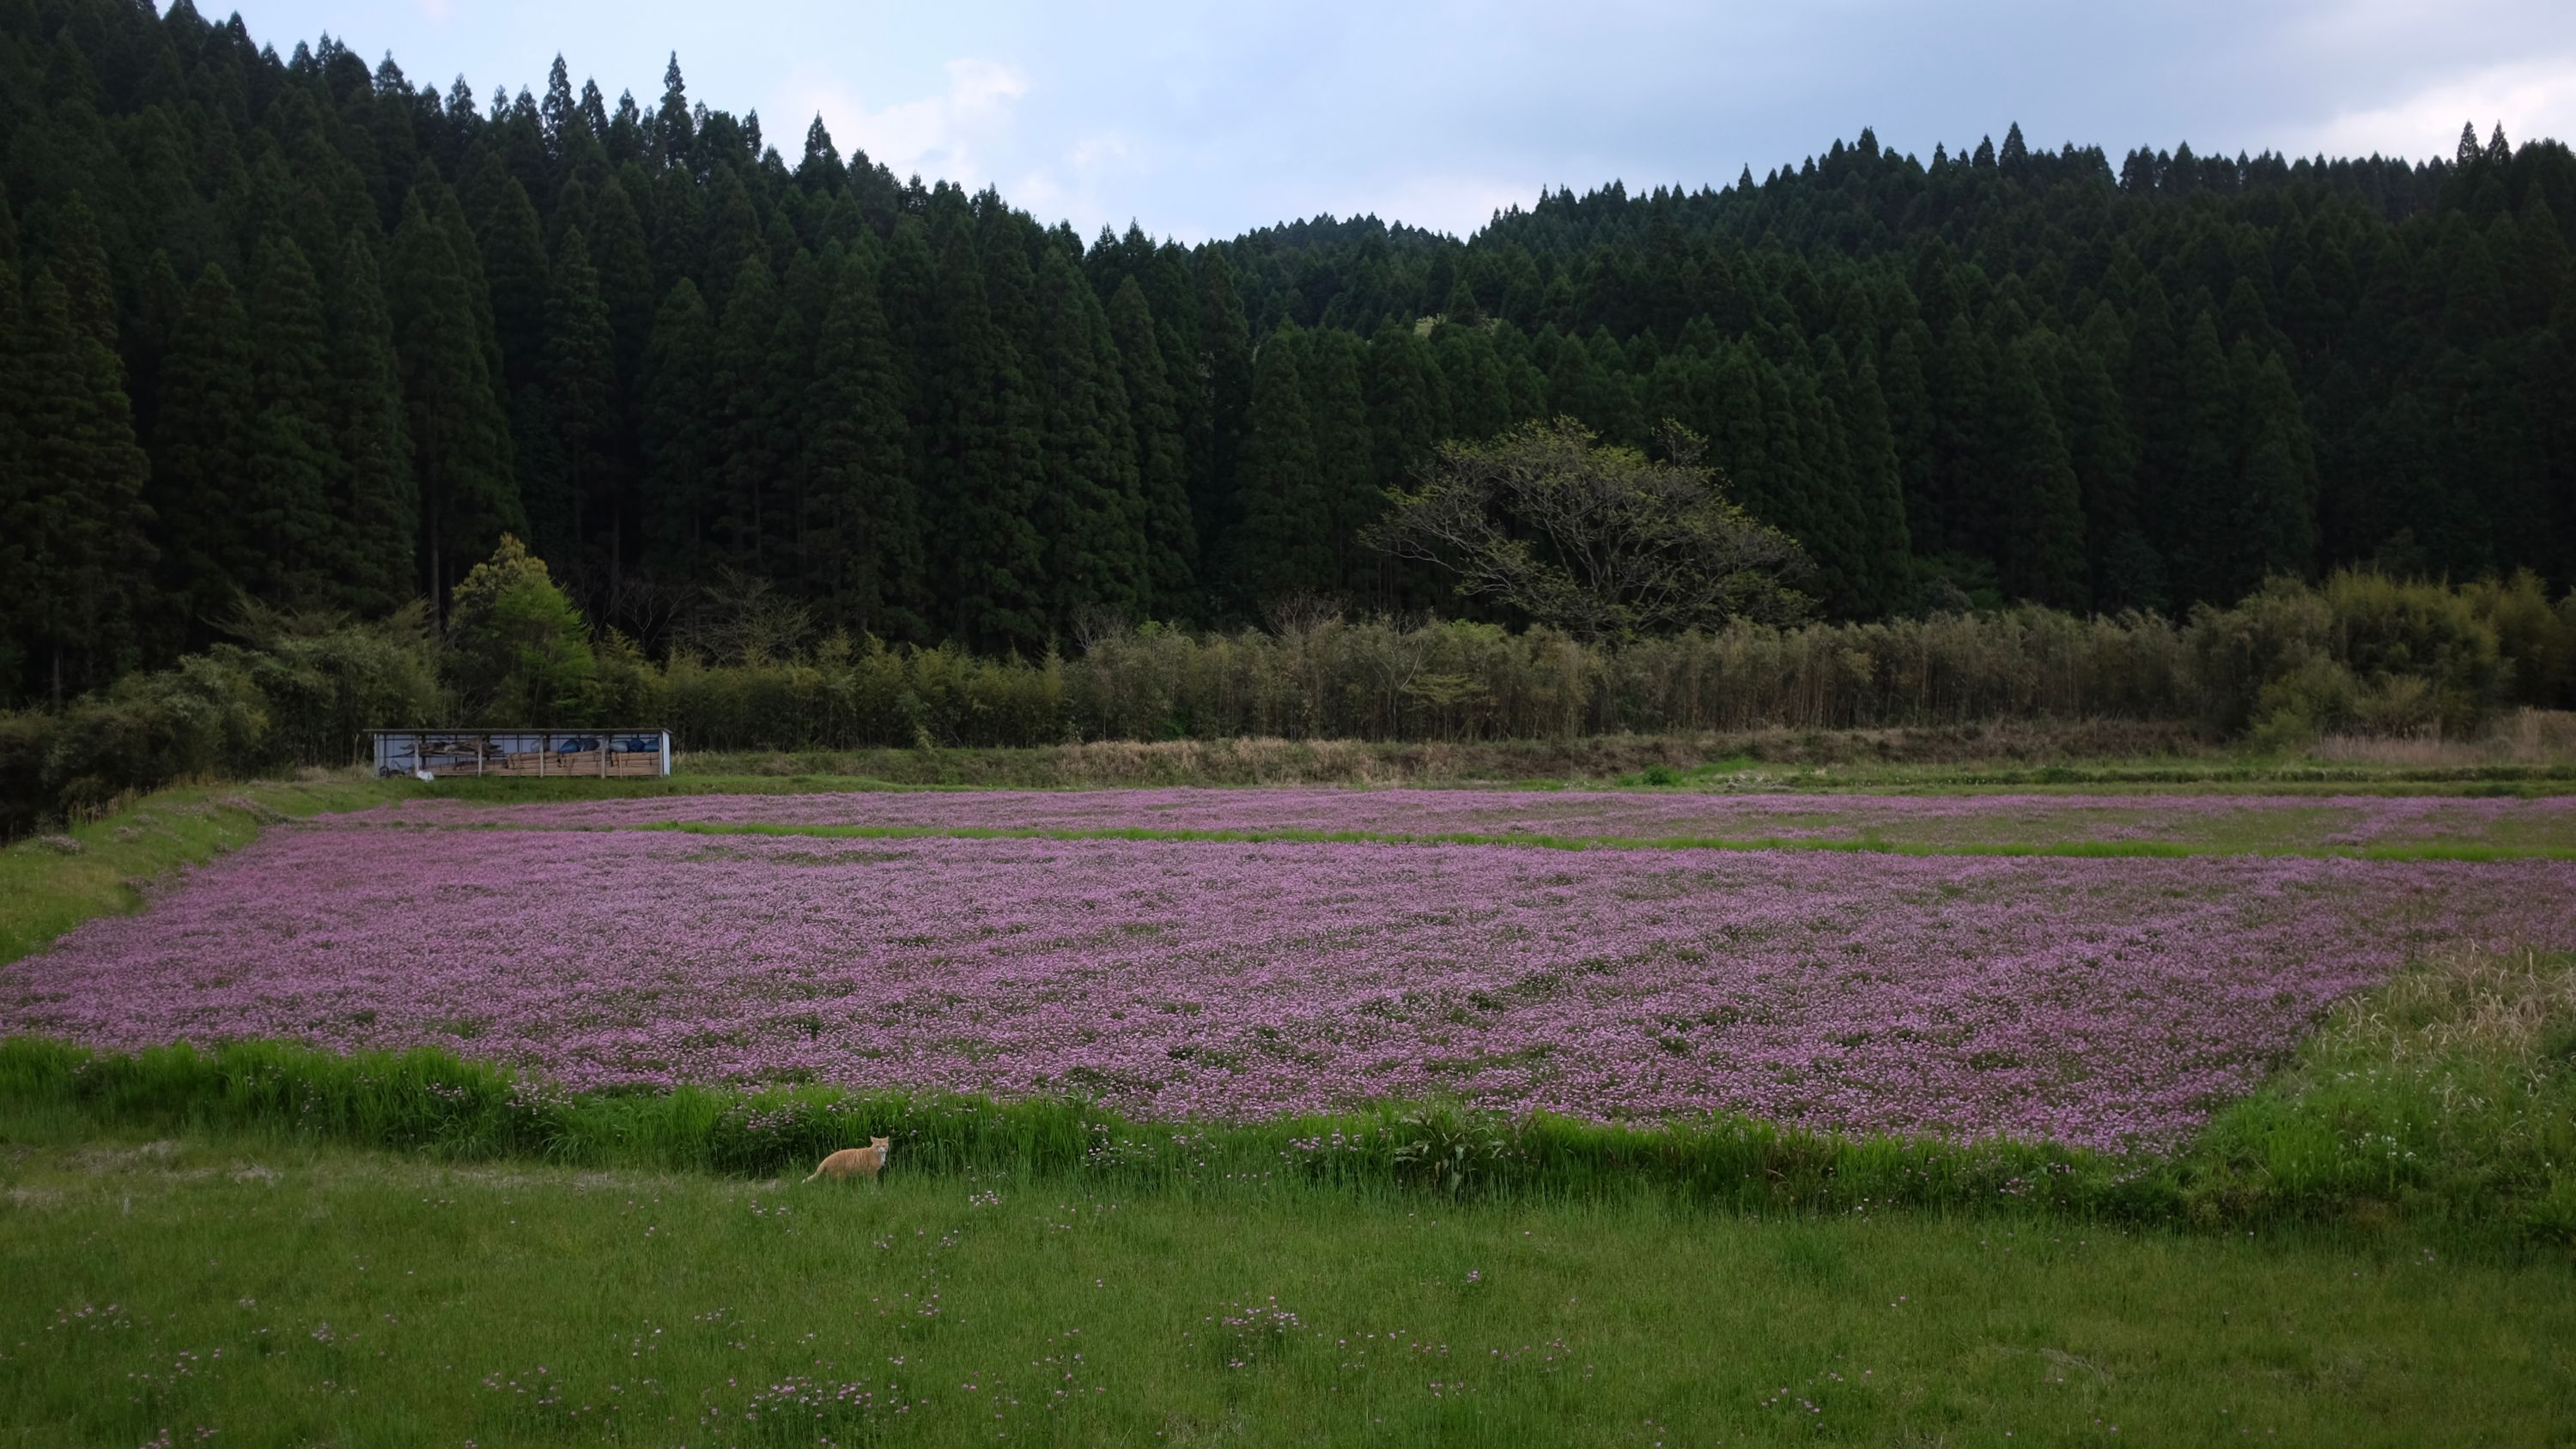 A cat walks by a pink field in front of a cedar forest.